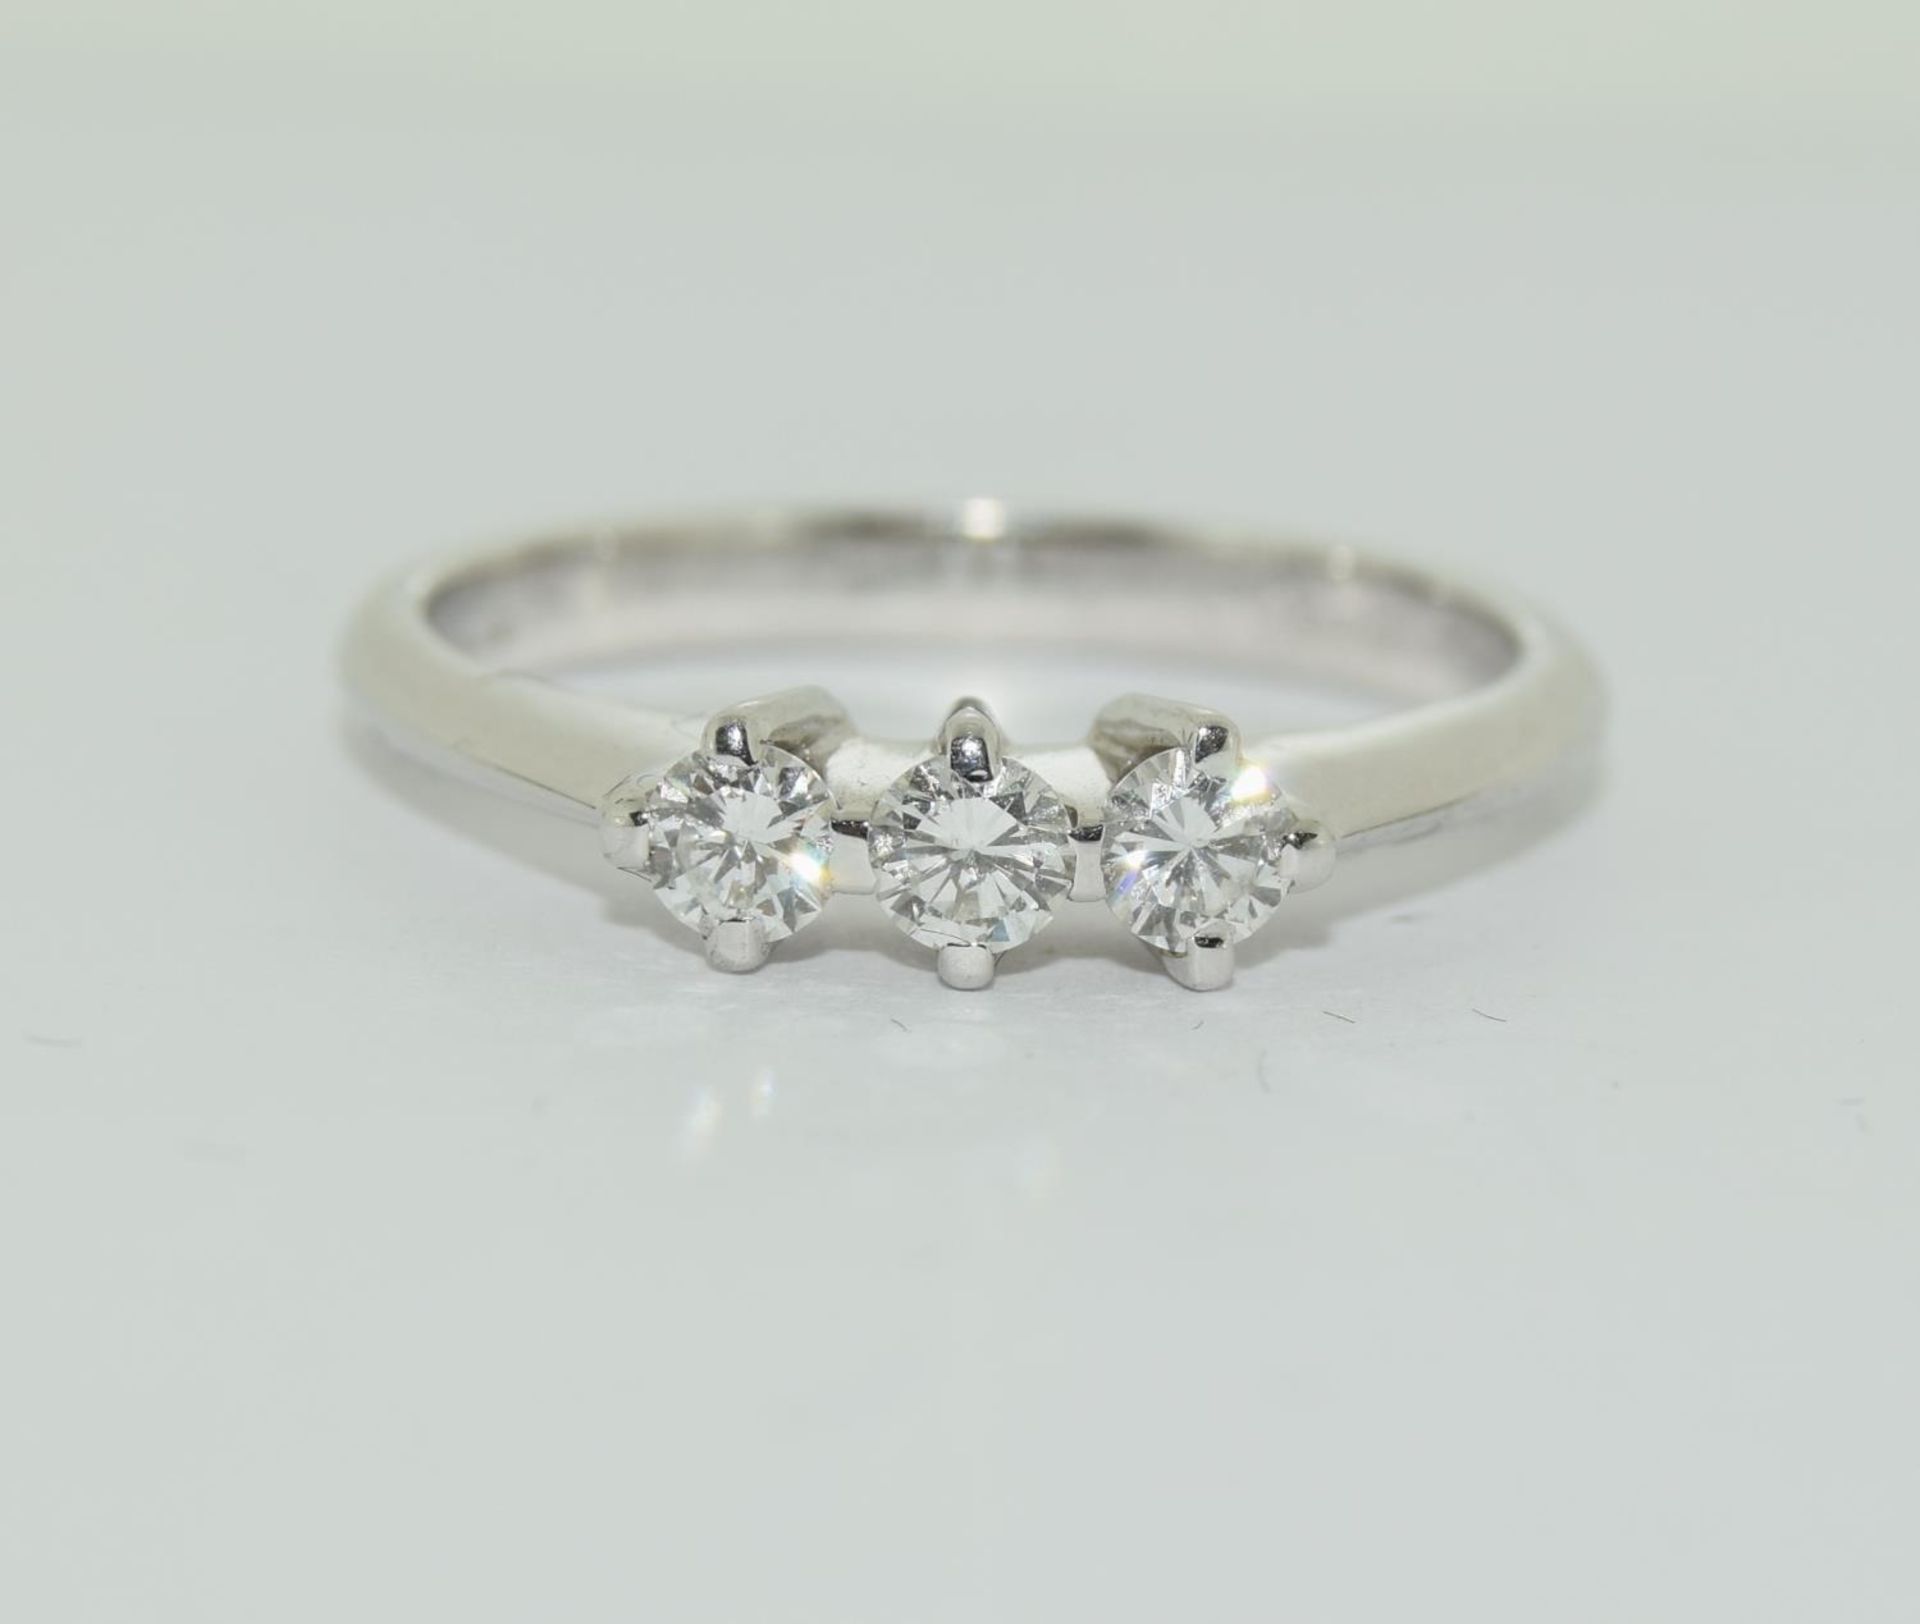 18ct white gold 3 stone diamond bring in 4 claw setting with brilliant stone approx 4.2ct size N - Image 5 of 5